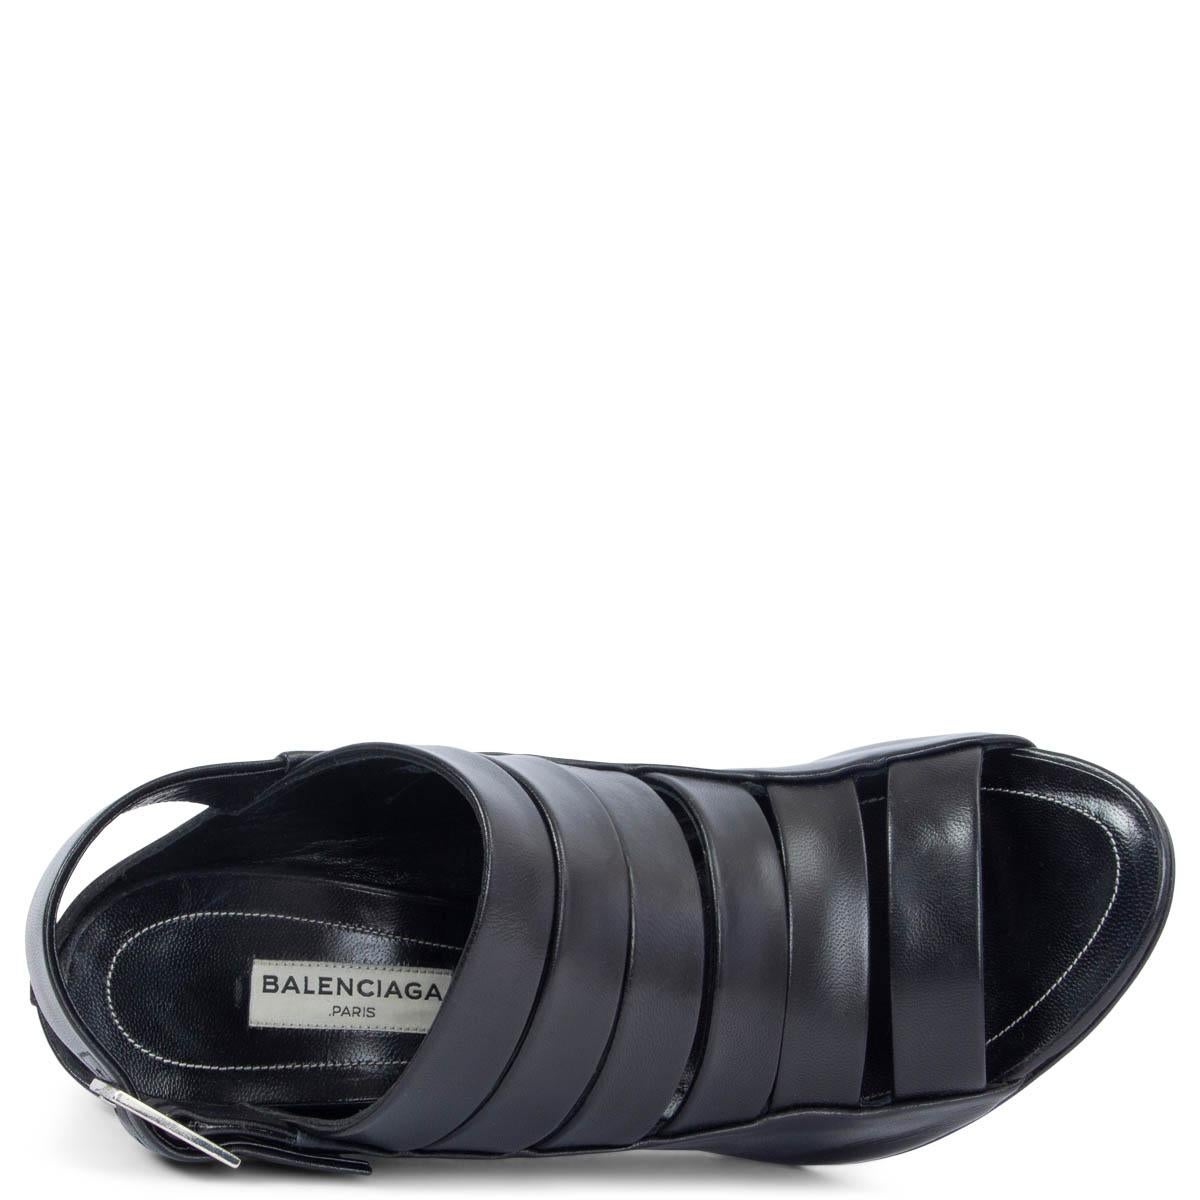 BALENCIAGA black leather STRAPPY Sandals Shoes 38 For Sale 2